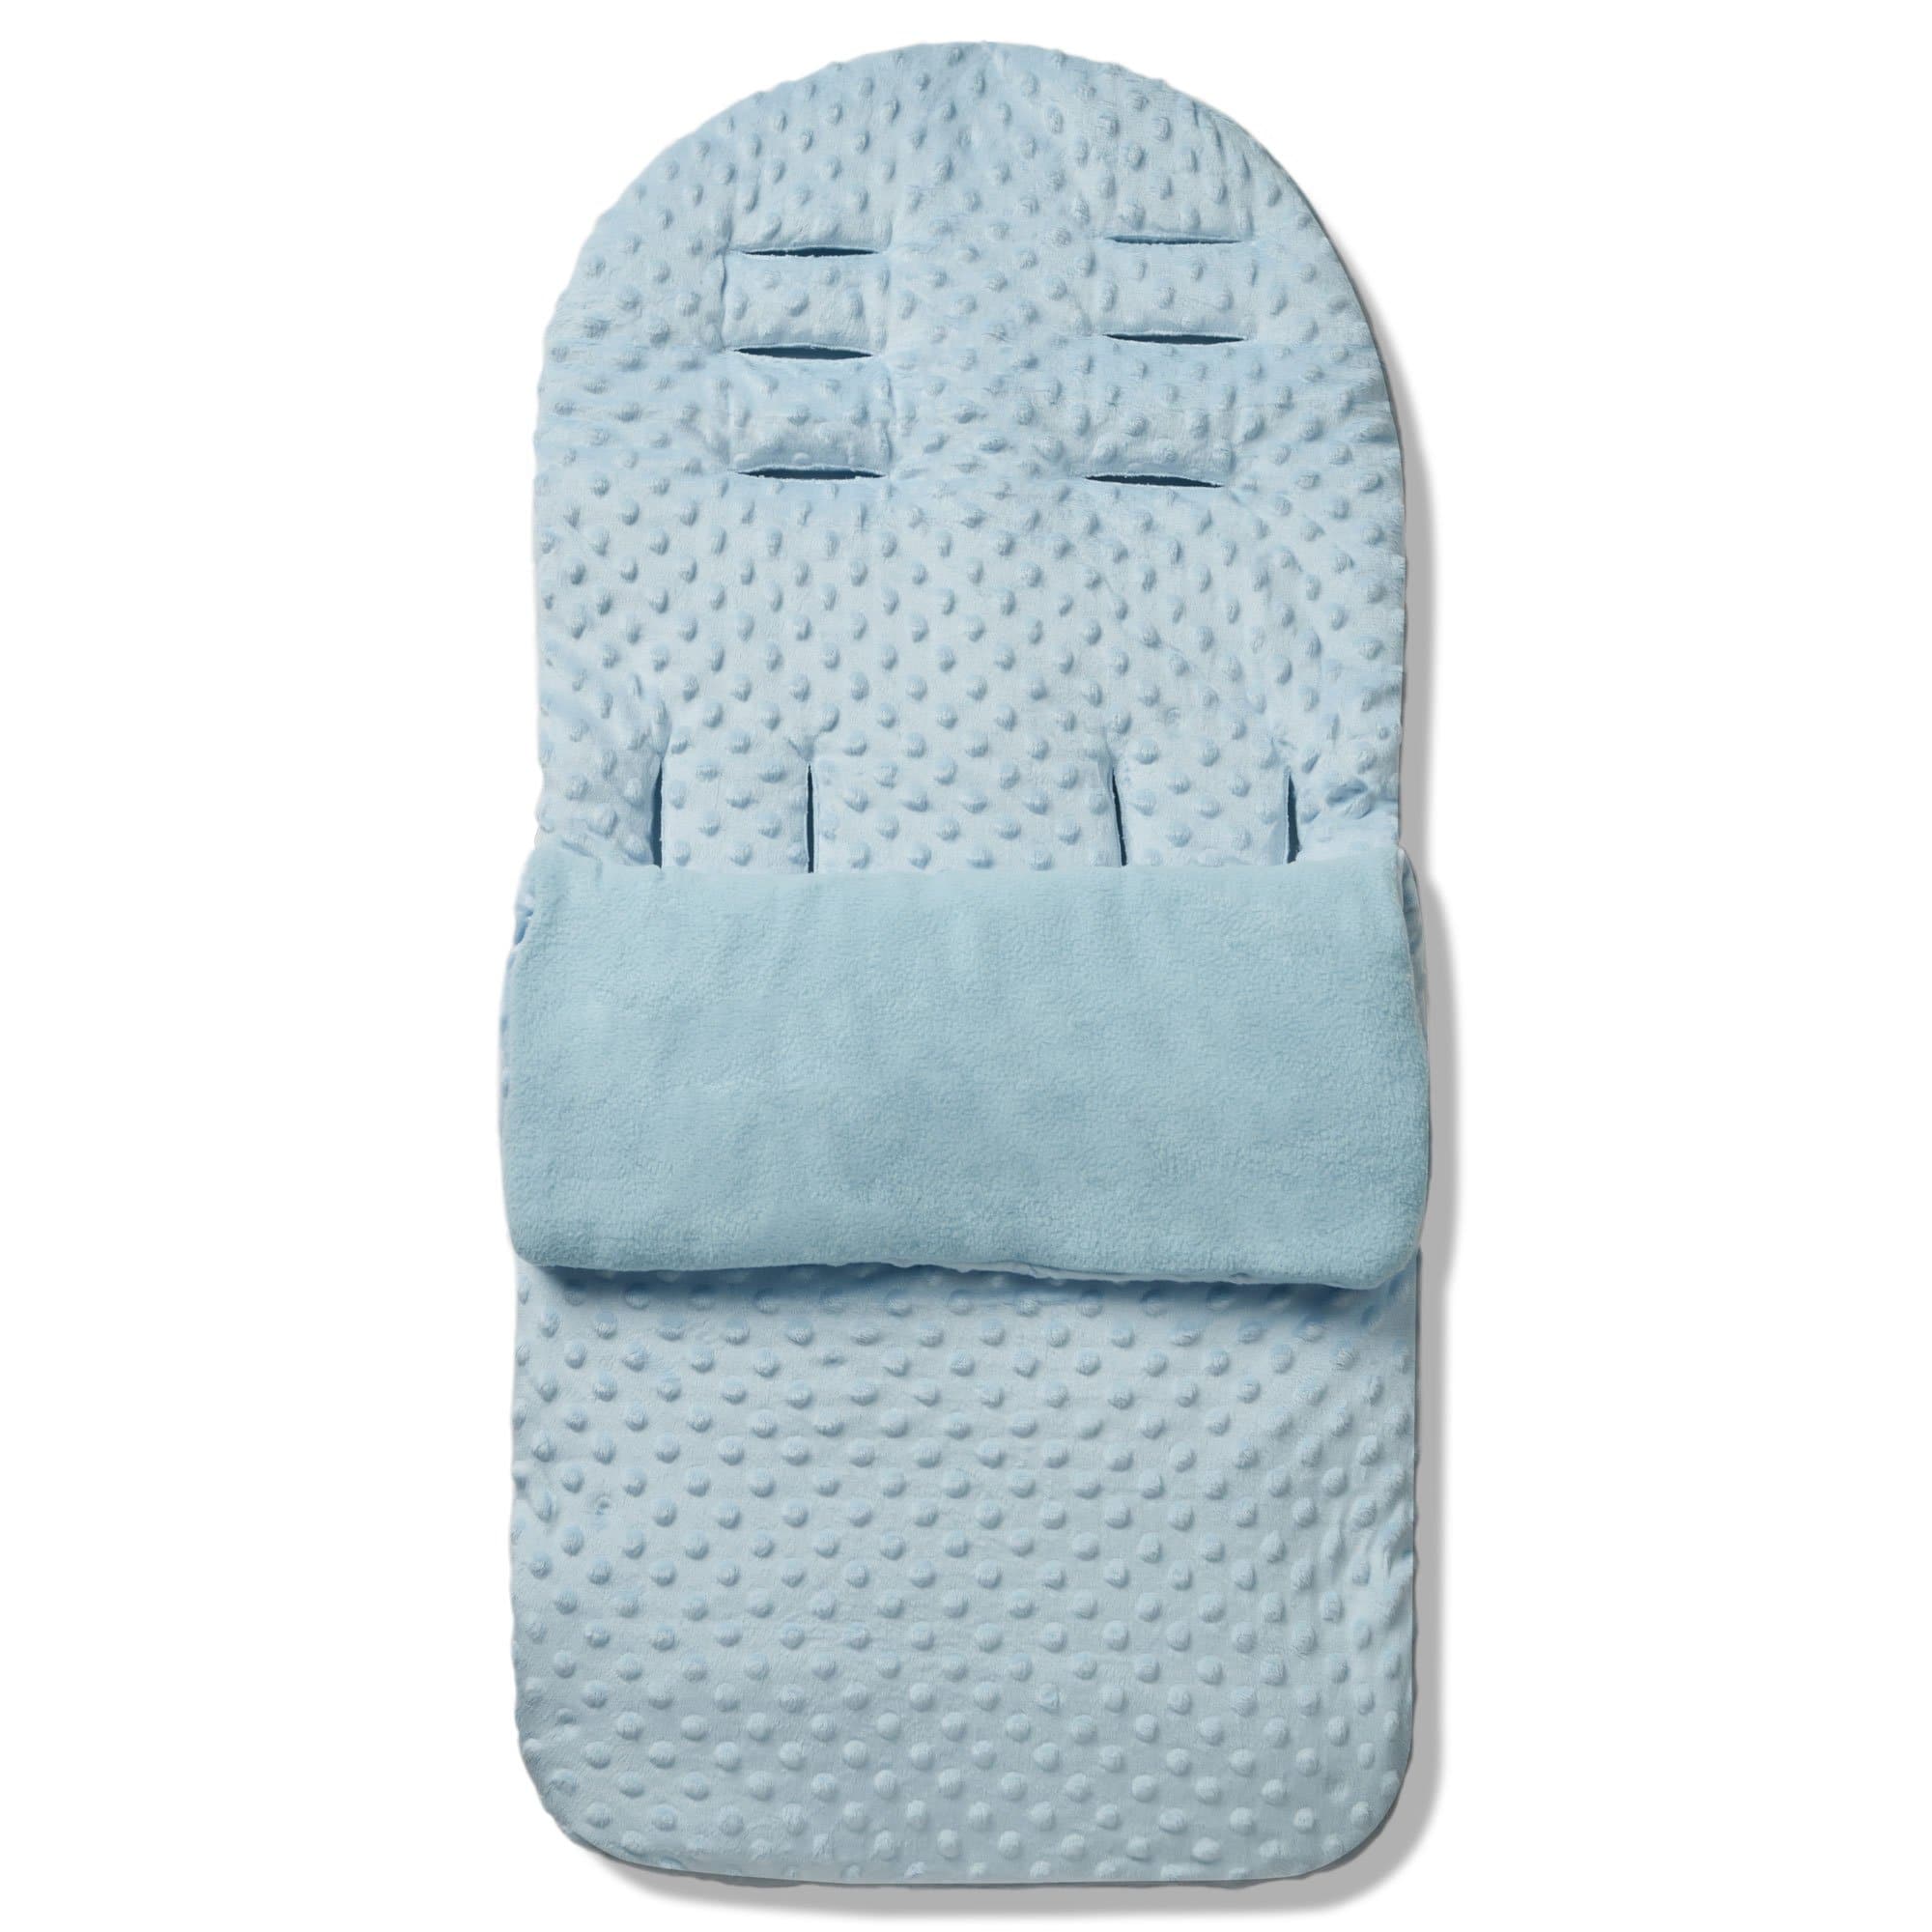 Dimple Footmuff / Cosy Toes Compatible with Seed - Blue / Fits All Models | For Your Little One